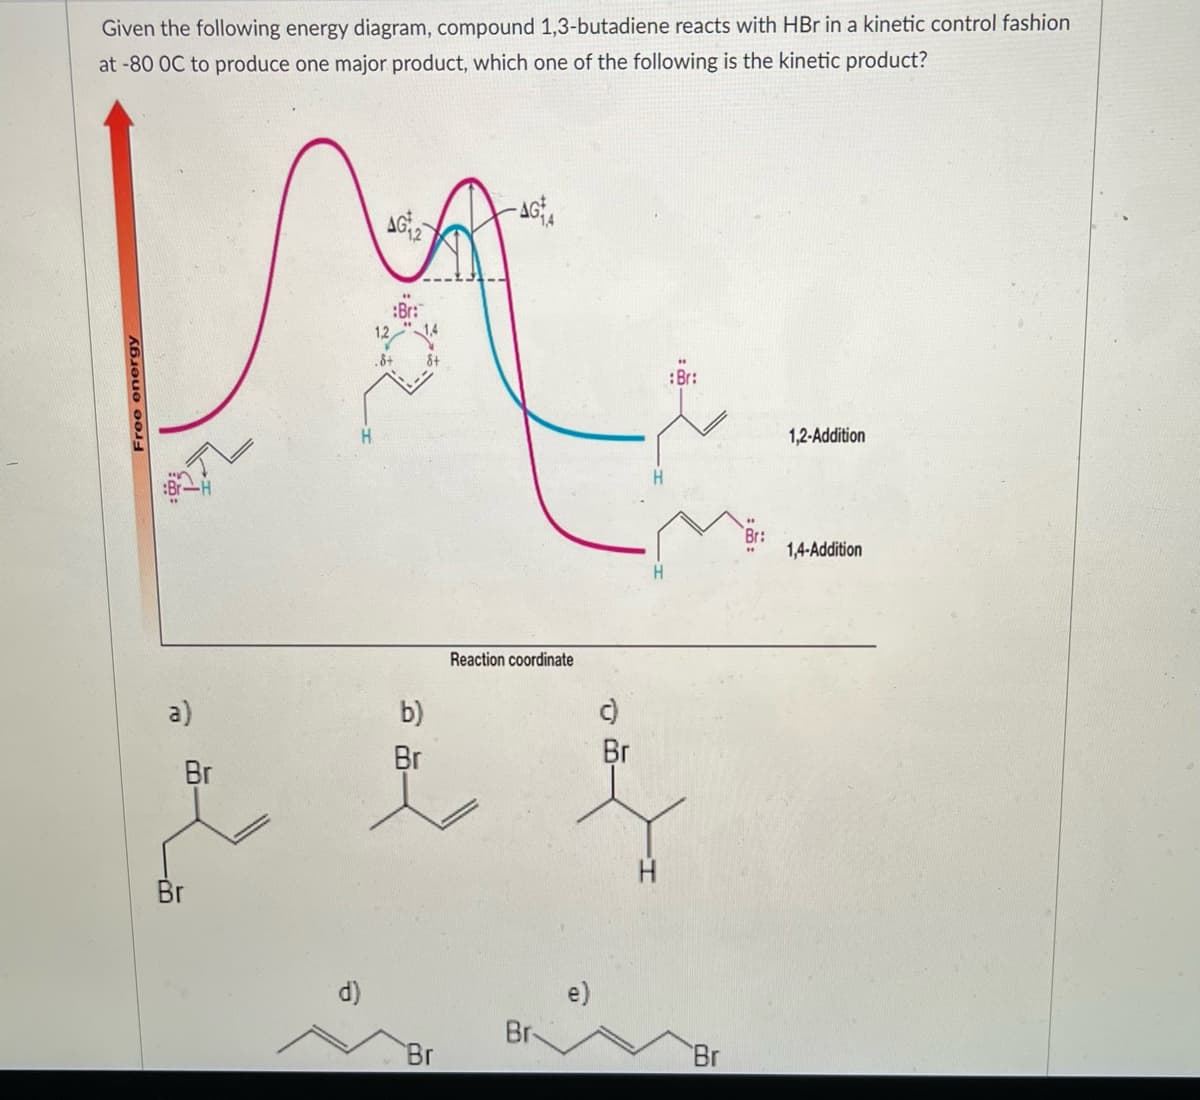 Given the following energy diagram, compound 1,3-butadiene reacts with HBr in a kinetic control fashion
at -80 OC to produce one major product, which one of the following is the kinetic product?
-AG
AG
M
H
Free energy
a)
Br
Br
Reaction coordinate
b)
Br
Br
if
H
d)
Br
Br
:Br:
e)
Br
::
1,2-Addition
1,4-Addition